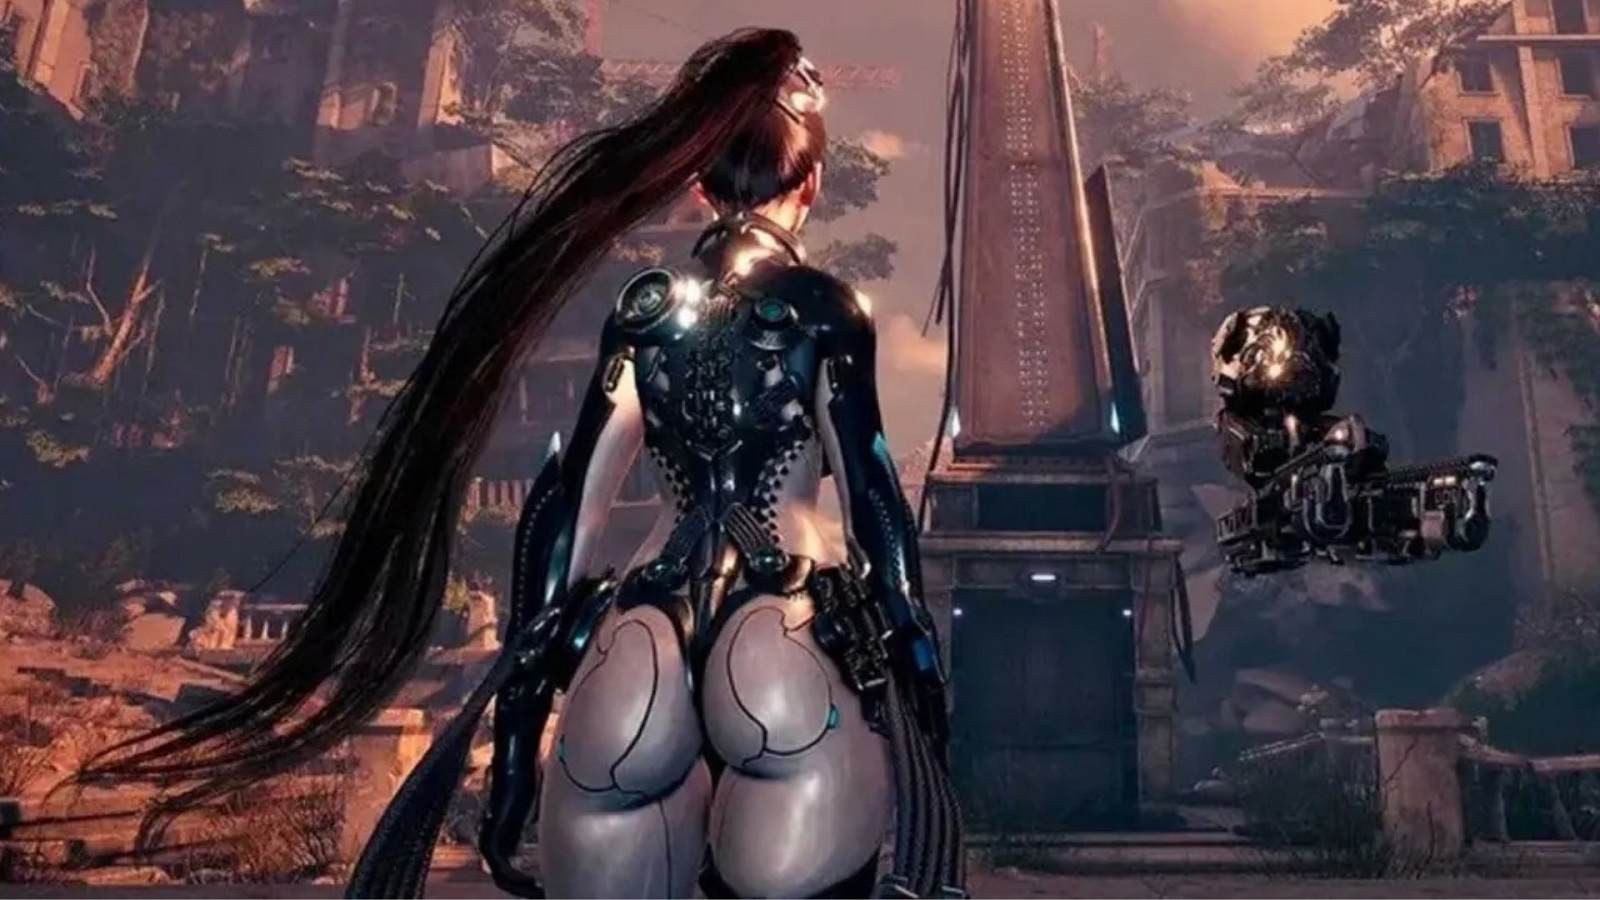 Stellar-Blade-gets-adults-only-rating-in-Korea-for-nudity-violence-ahead-of-PS5-launch.jpg